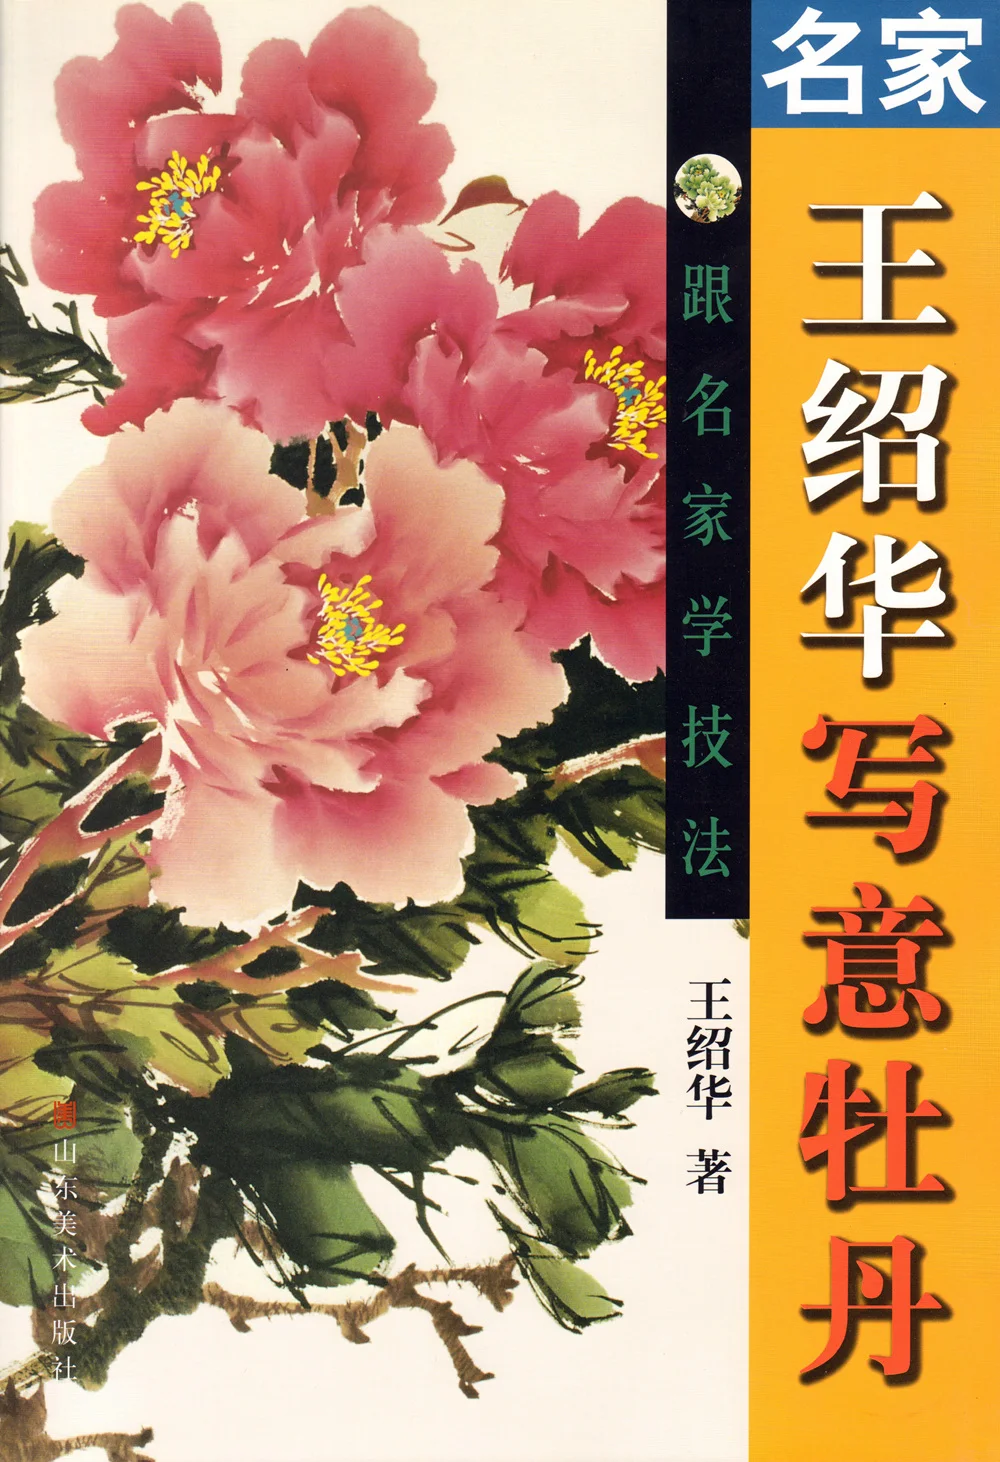 

Chinese traditional painting art book Learn Techniques from Famous Masters: Master Wang Shaohua Freehands Peony